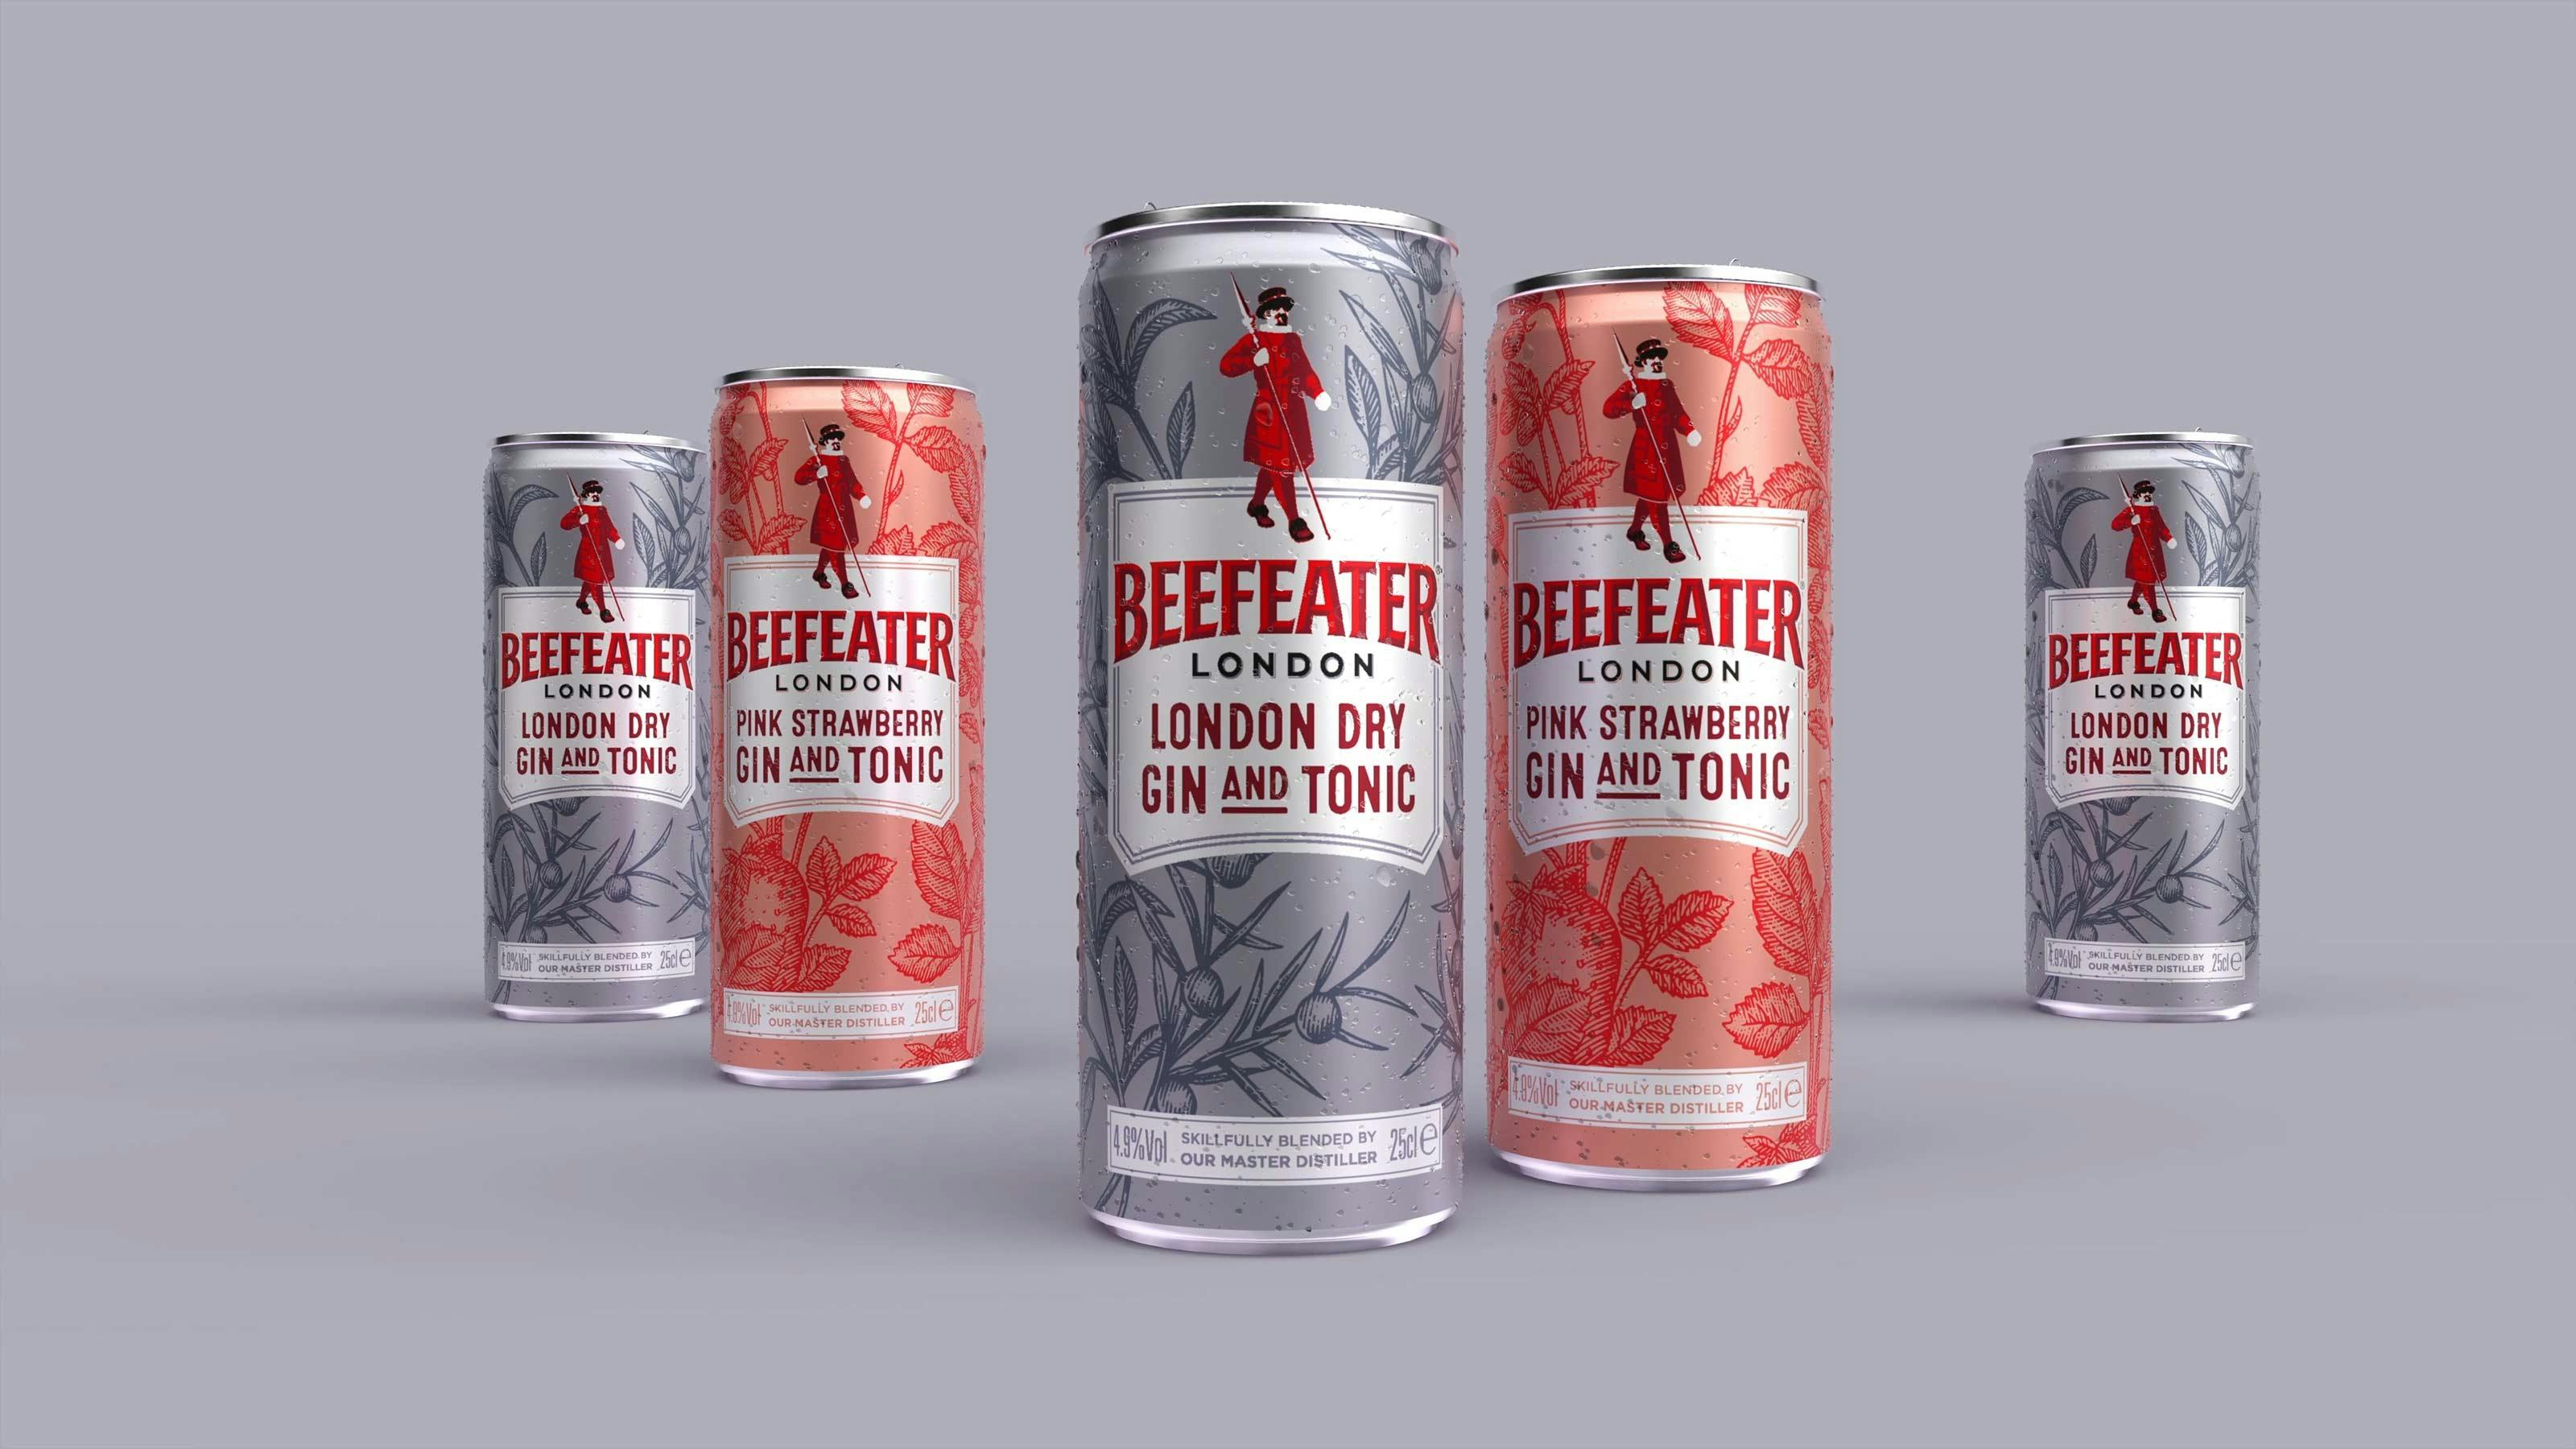 Beefeater cans